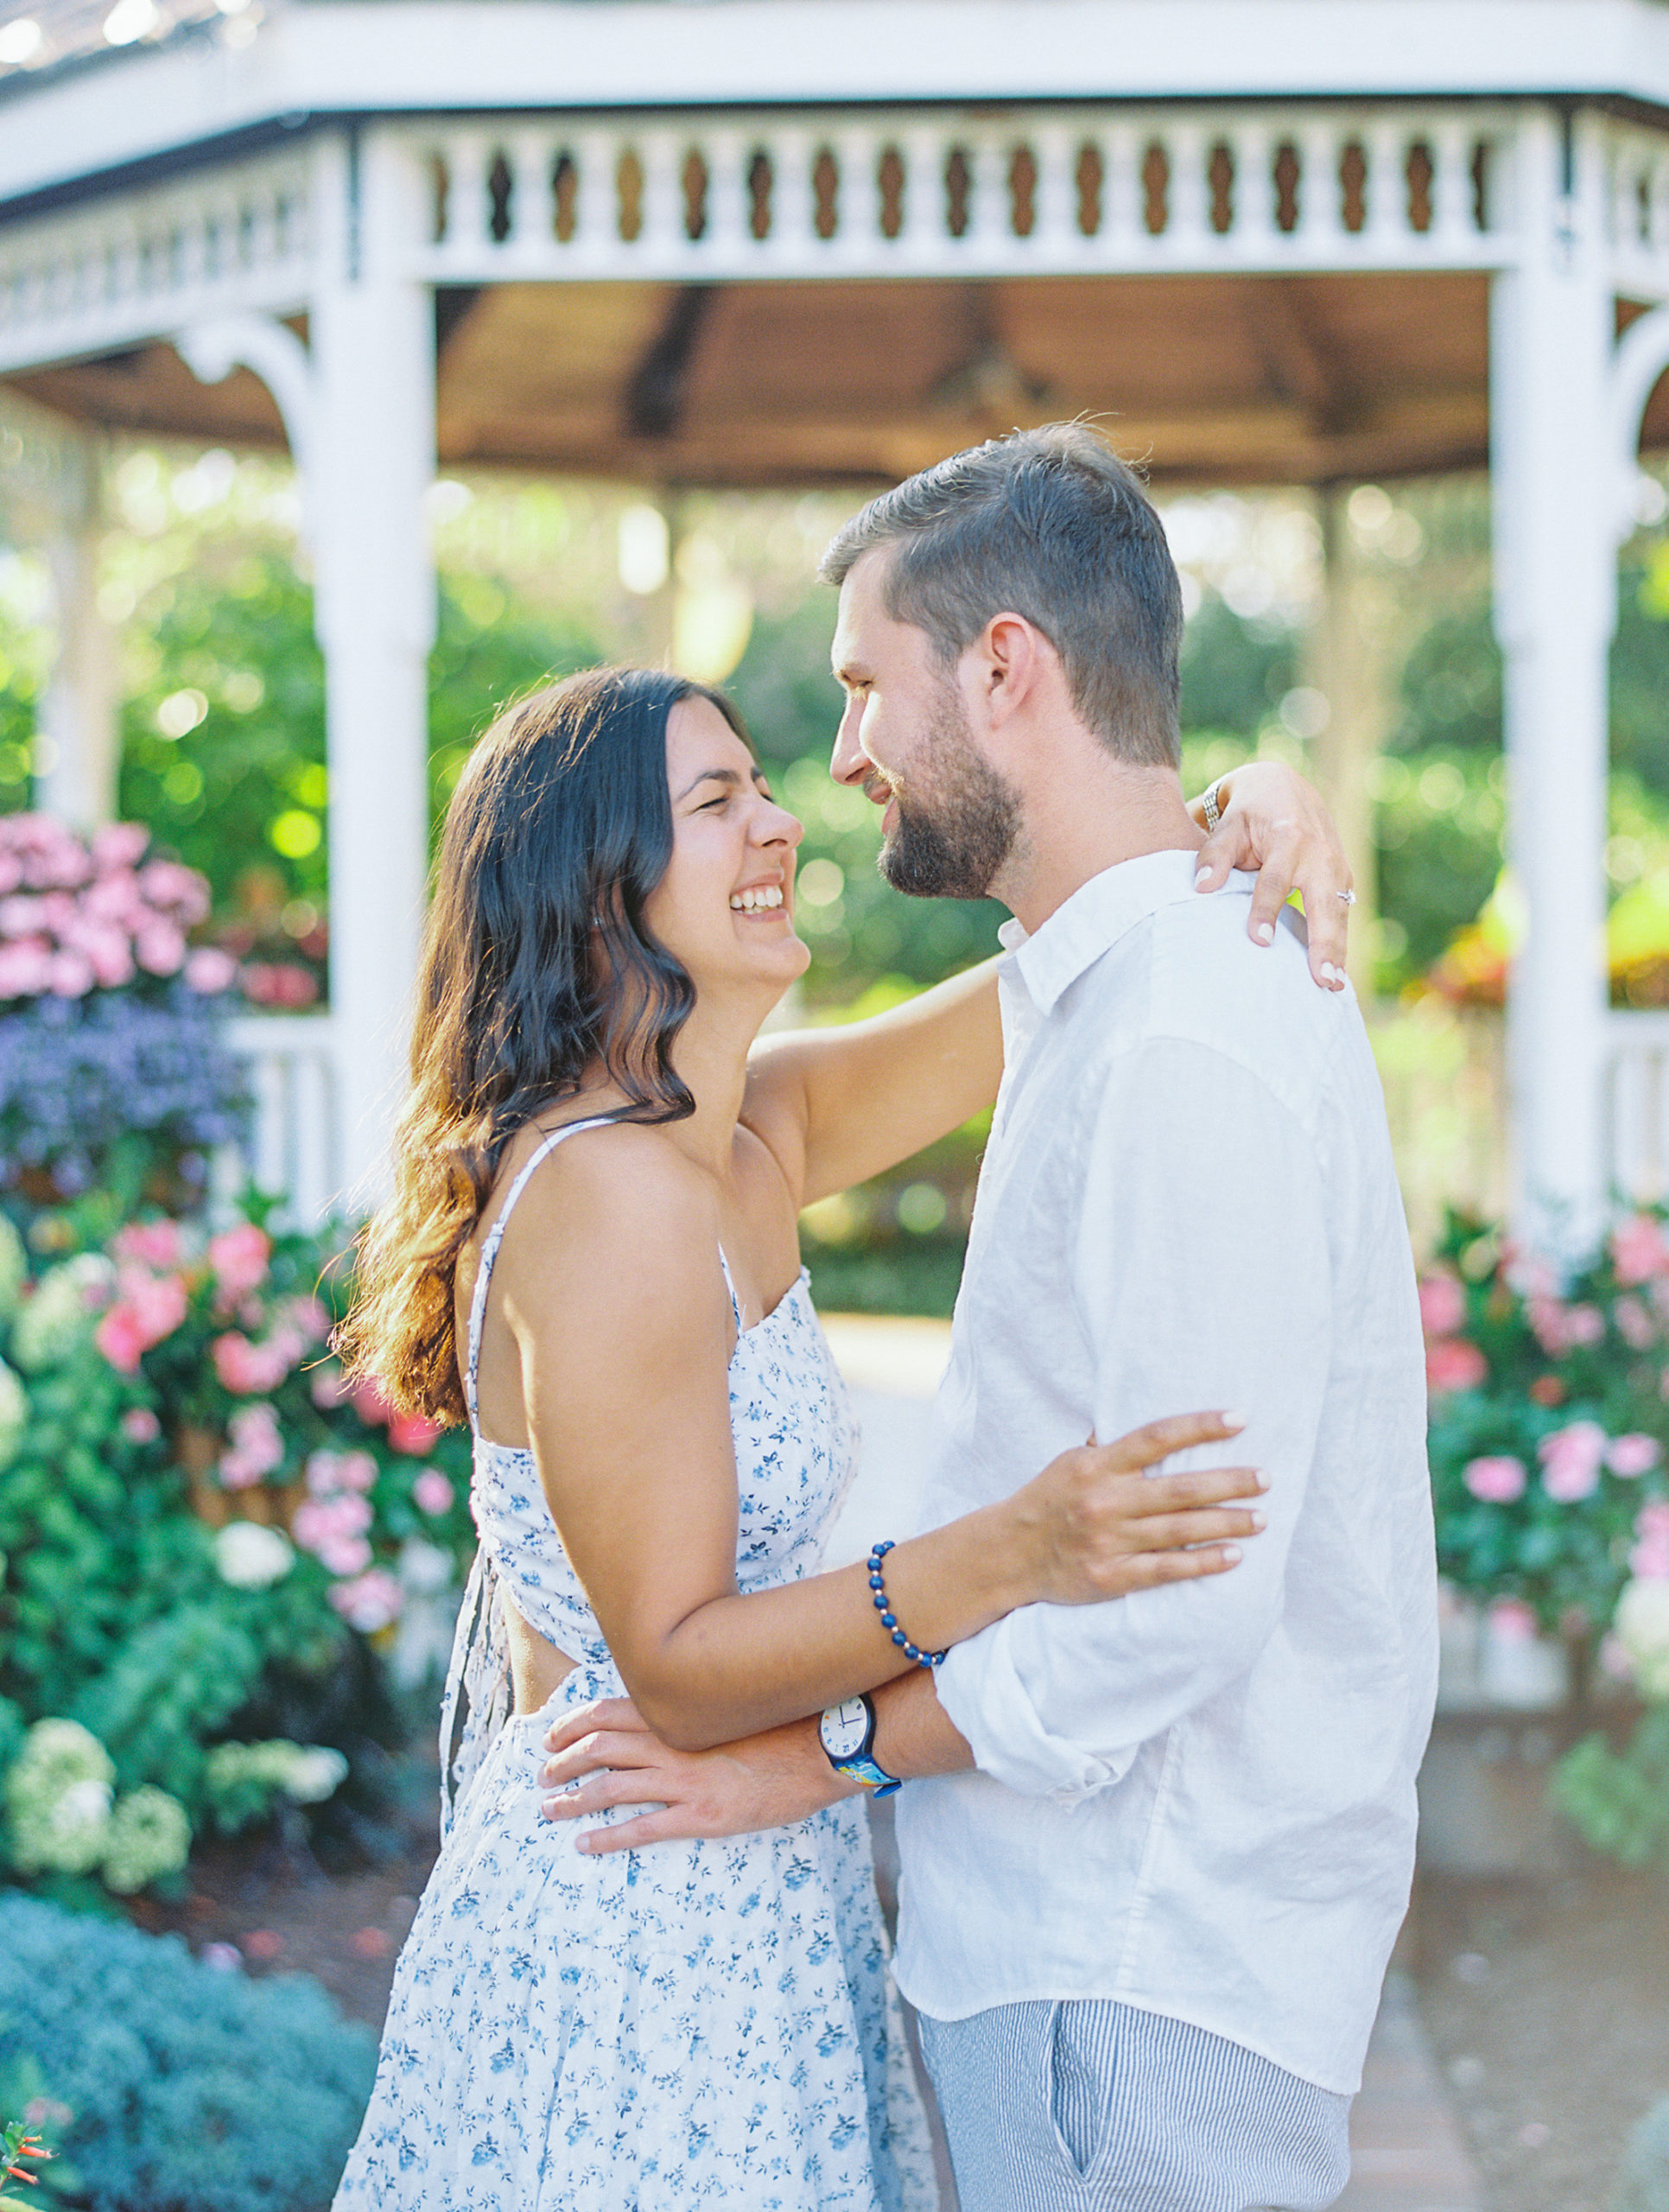 Couple laughs and embraces in front of gazebo garden 